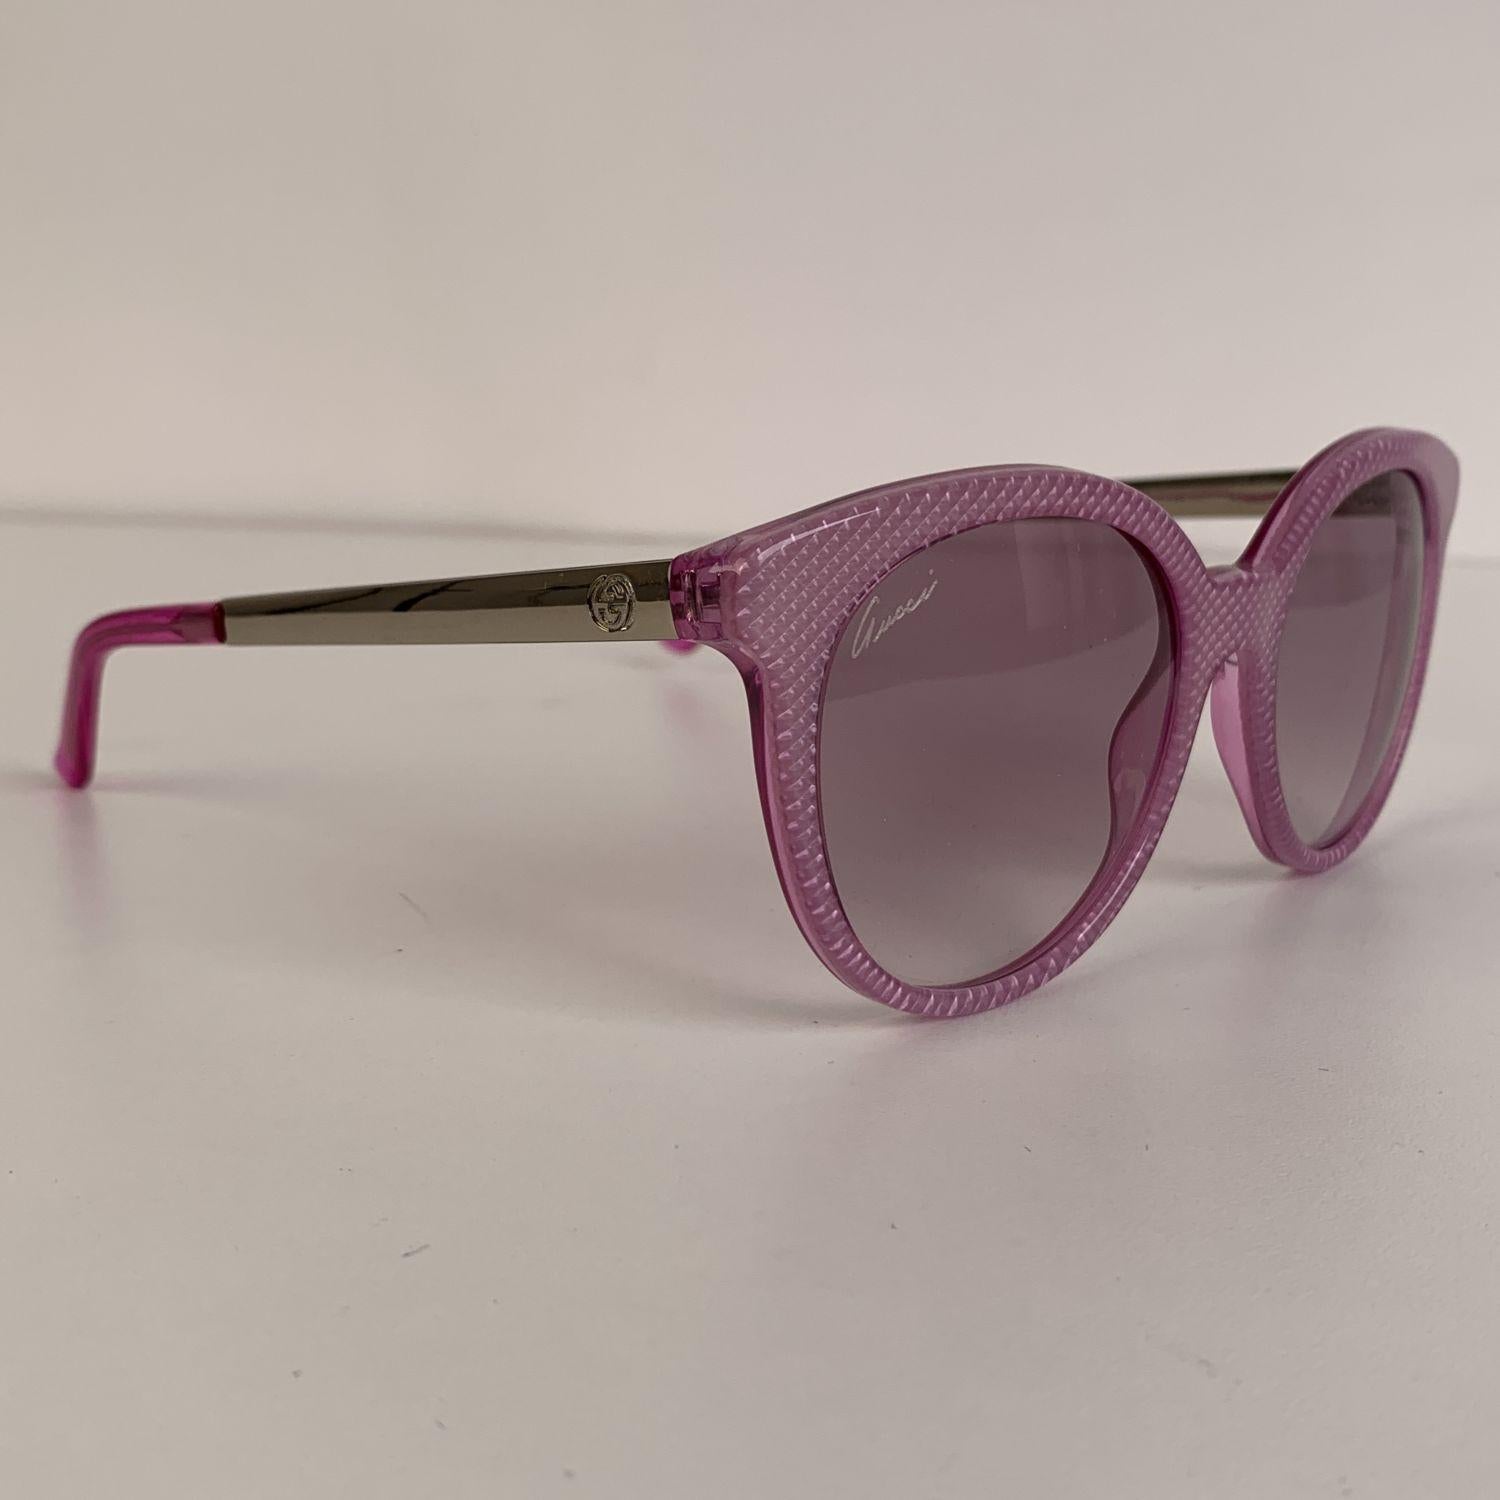 Gucci Women's Sunglasses 3674 / S, Pink acetate frame with silver metal arms. GG - GUCCI logo on temples. Gradient nylon lenses. Refs and numbers: GG3674/S - 10NN3 - 53/19 - 140.



Details

MATERIAL: Acetate

COLOR: Pink

MODEL: GG3674/S

GENDER: